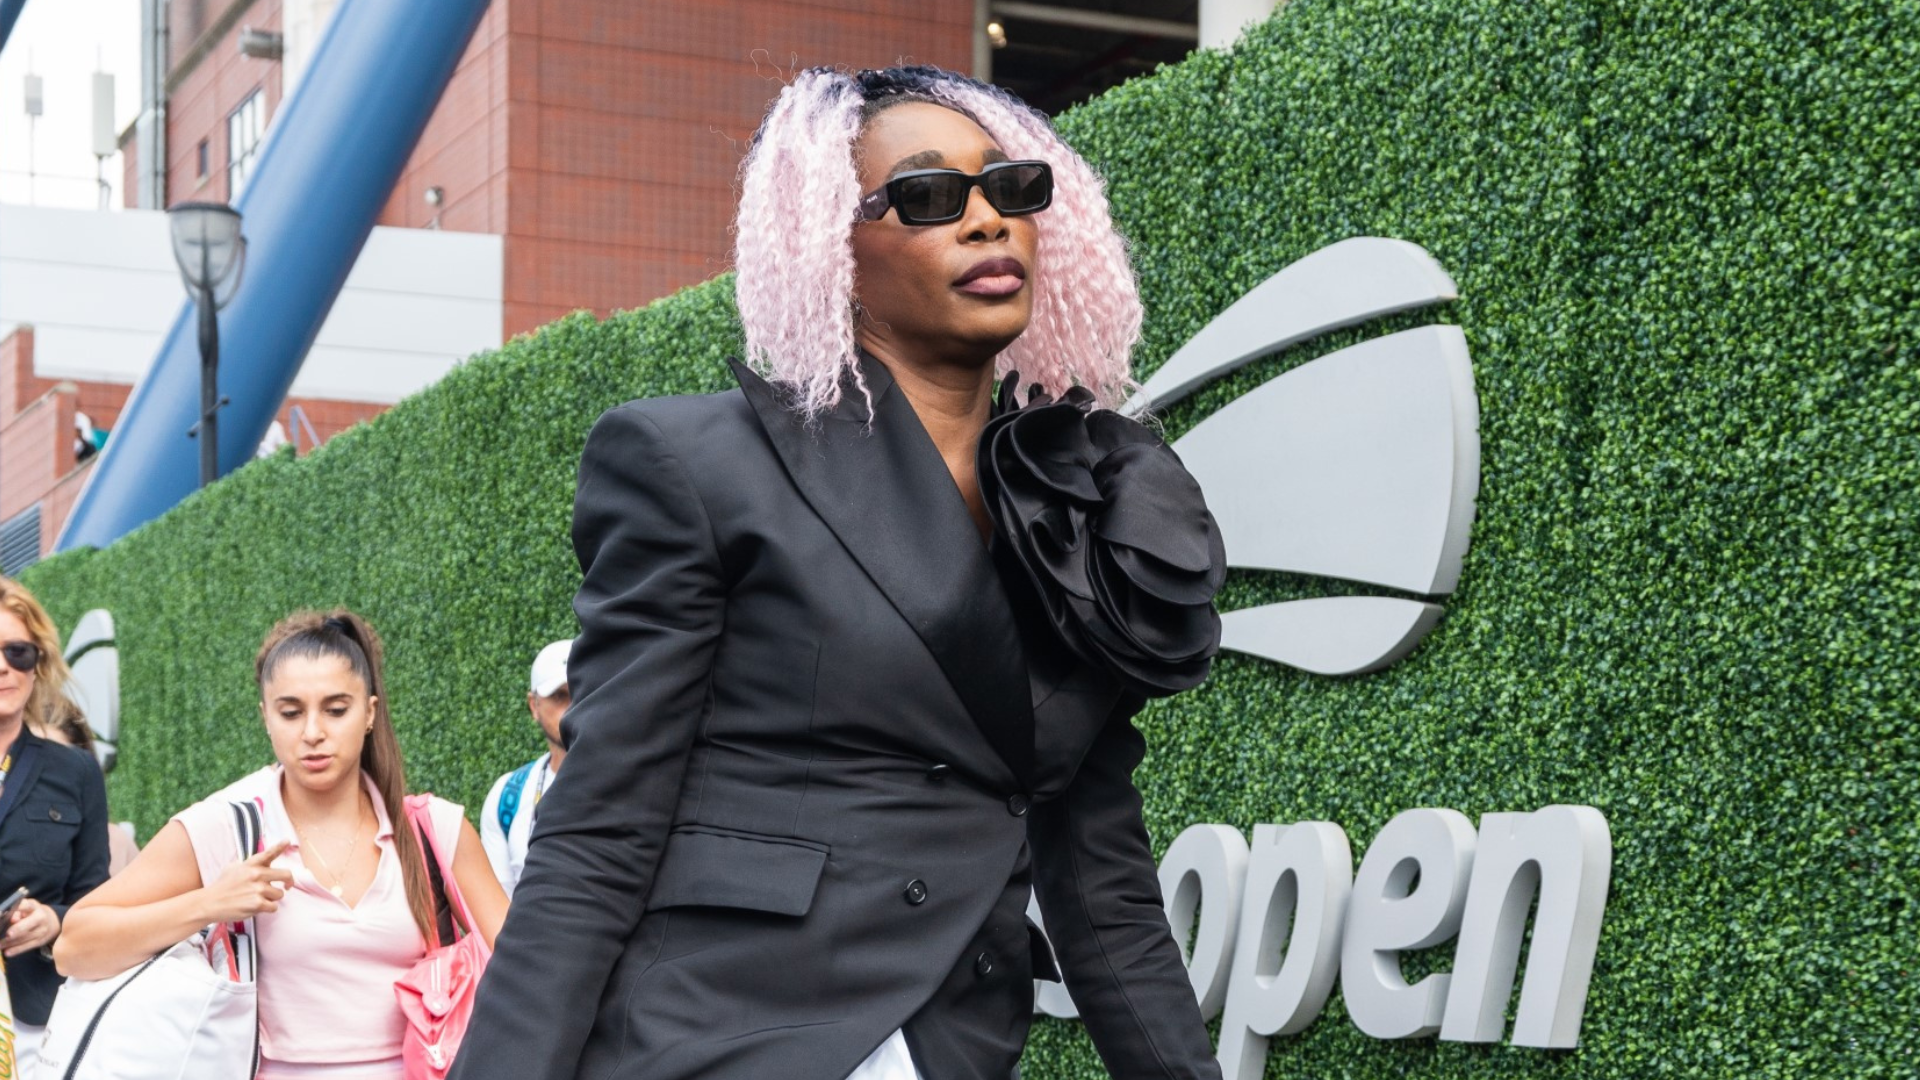 Venus Williams Makes A High Fashion Statement At The U.S. Open